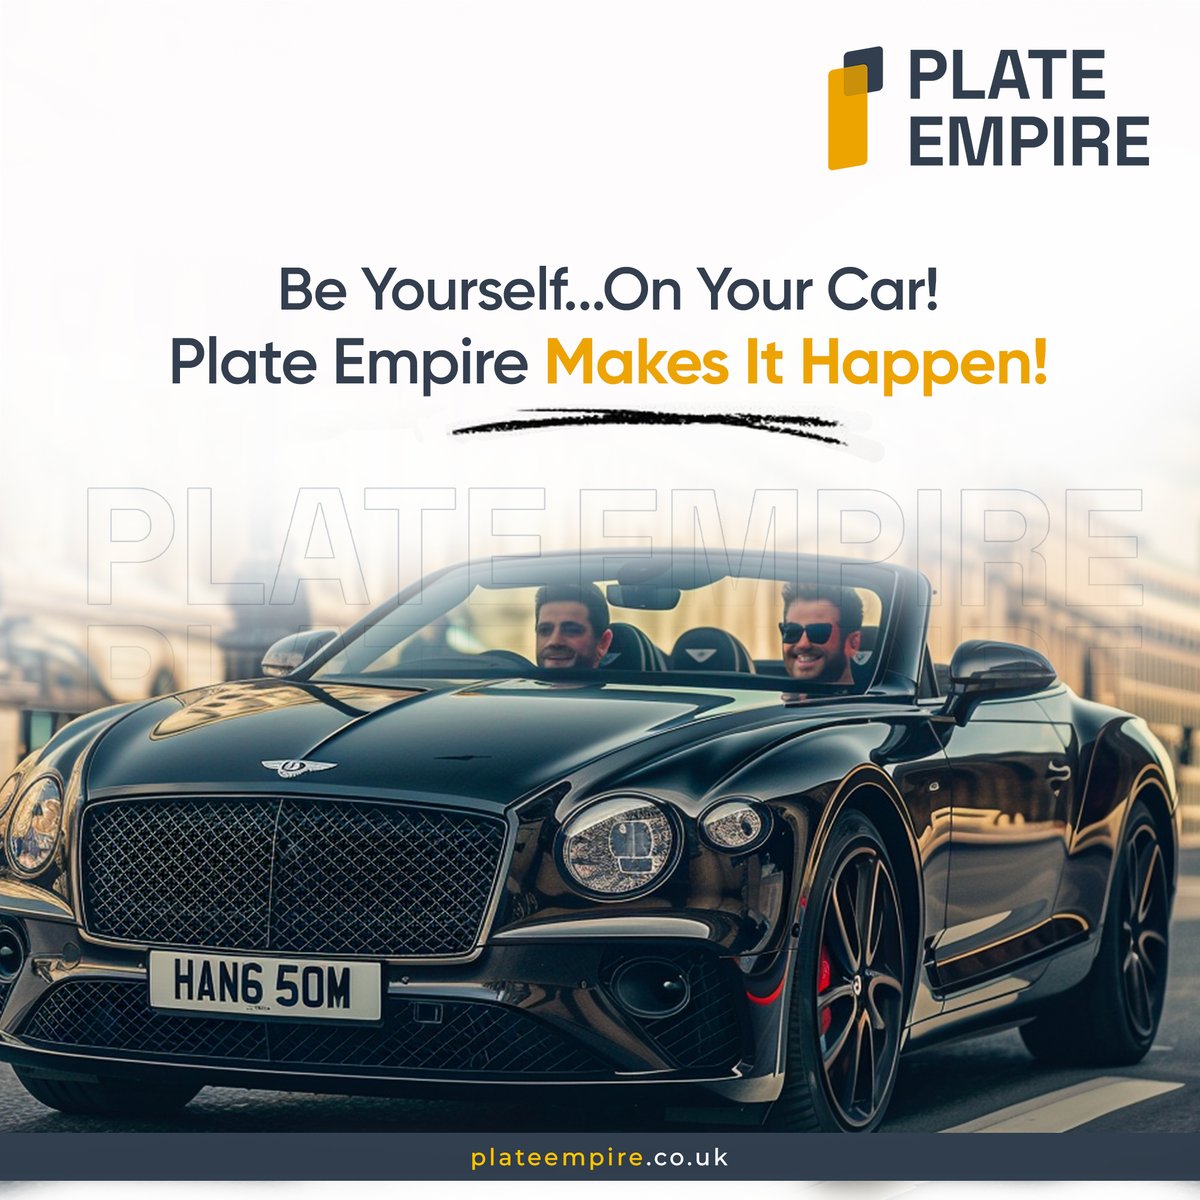 Make your mark on the road with Plate Empire! Let your car reflect your identity with our custom number plates. Your personal statement awaits!

#plateempire #fastdelivery #samedaydispatch #caridentity #uniqueplates #customizedcars #customplates #ukplates #ukplateshop #platesuk